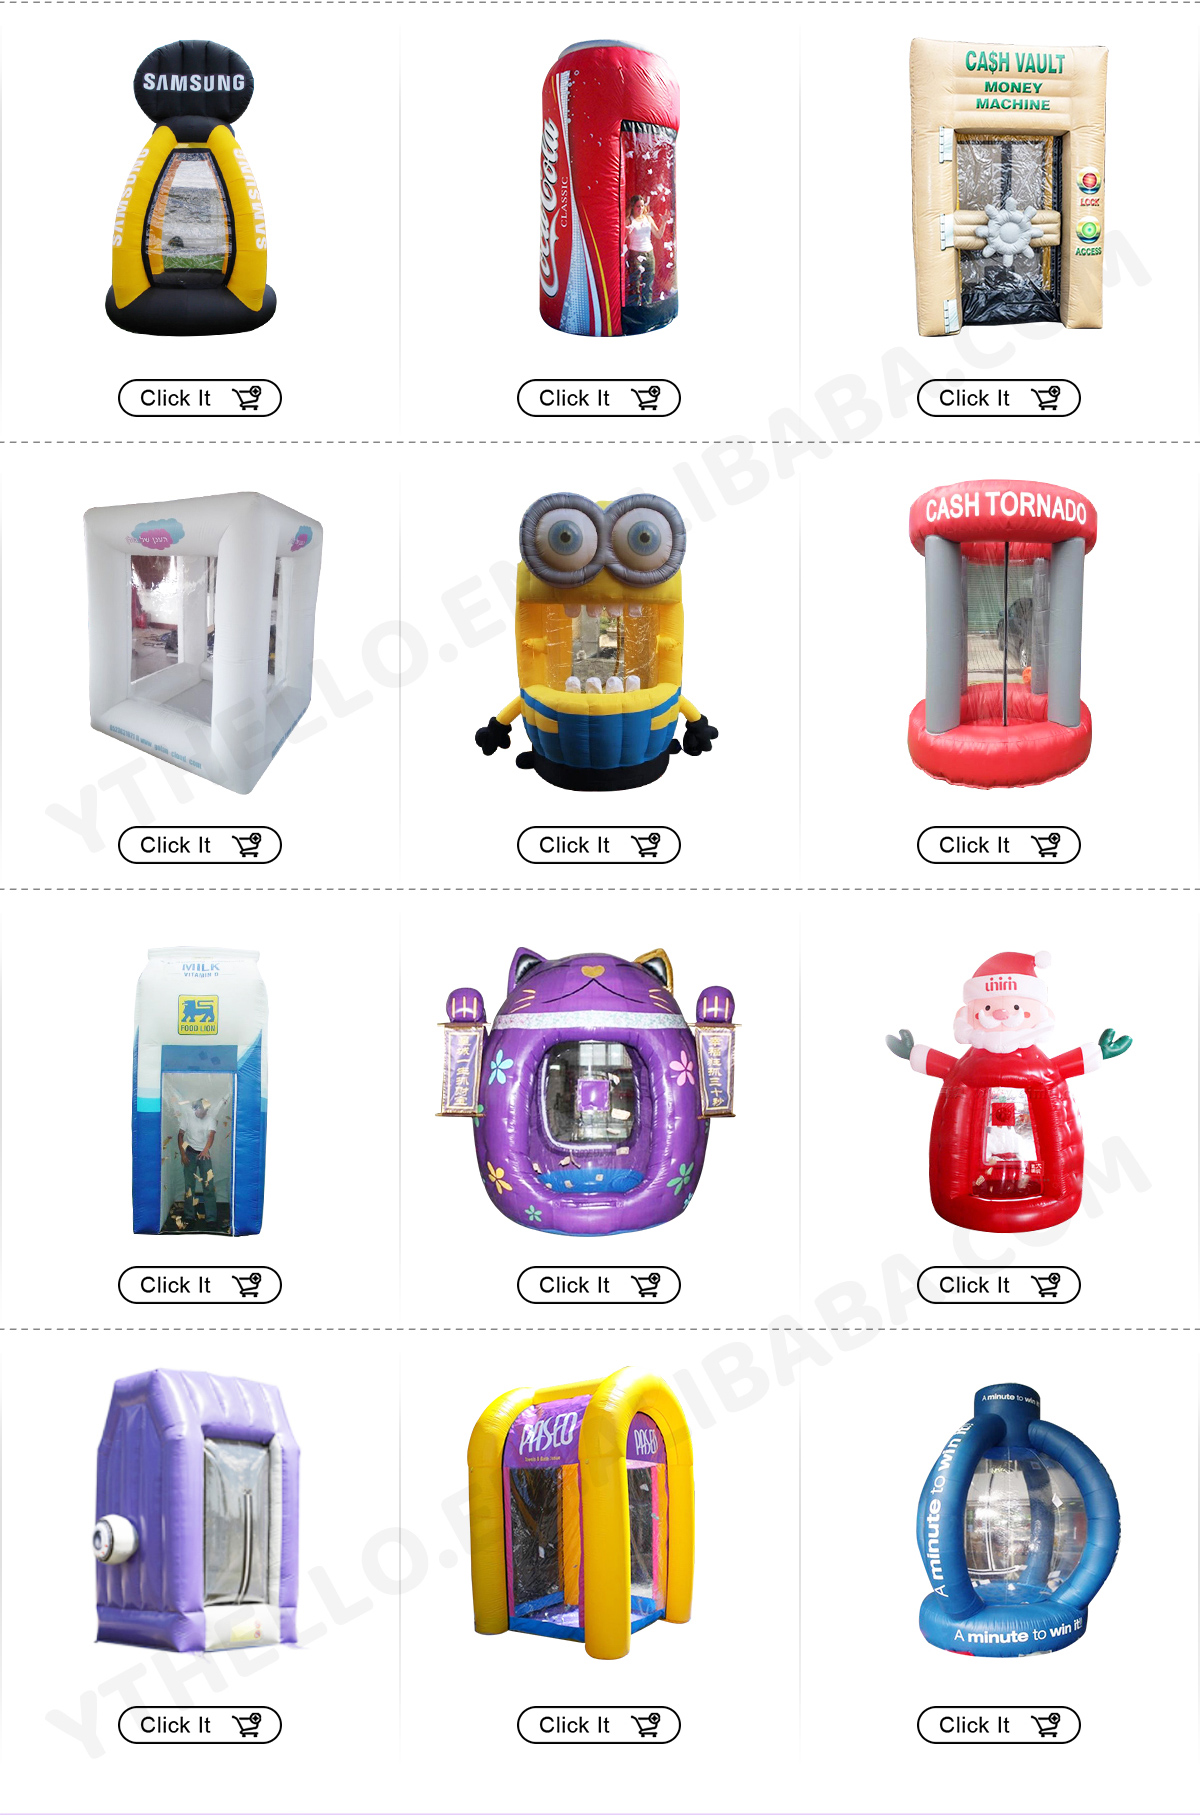 Inflatable Cash Vault / Grab Cash Cube Money Machine/ Inflatable interactive games standard money booth插图2